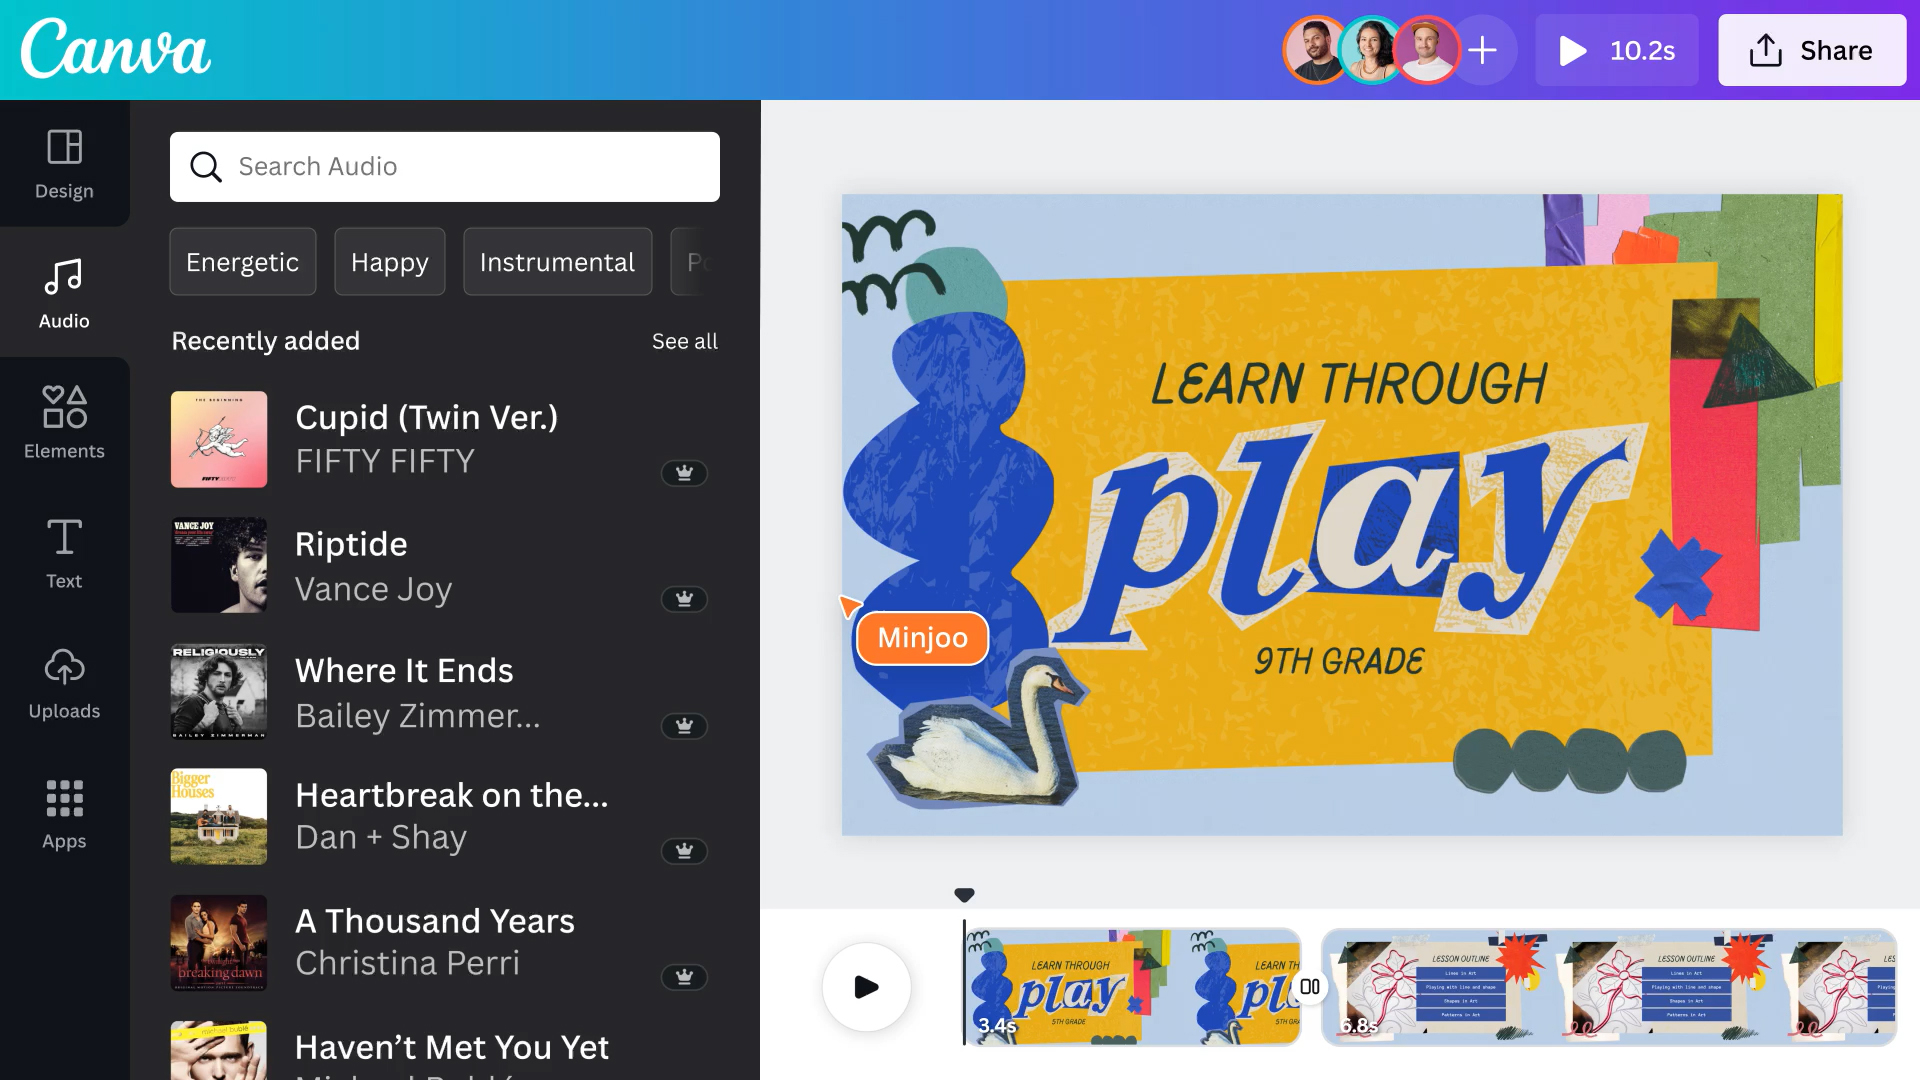 Teachers using Canva for Education can get students engaged by adding music to lesson plans, homework materials and more.